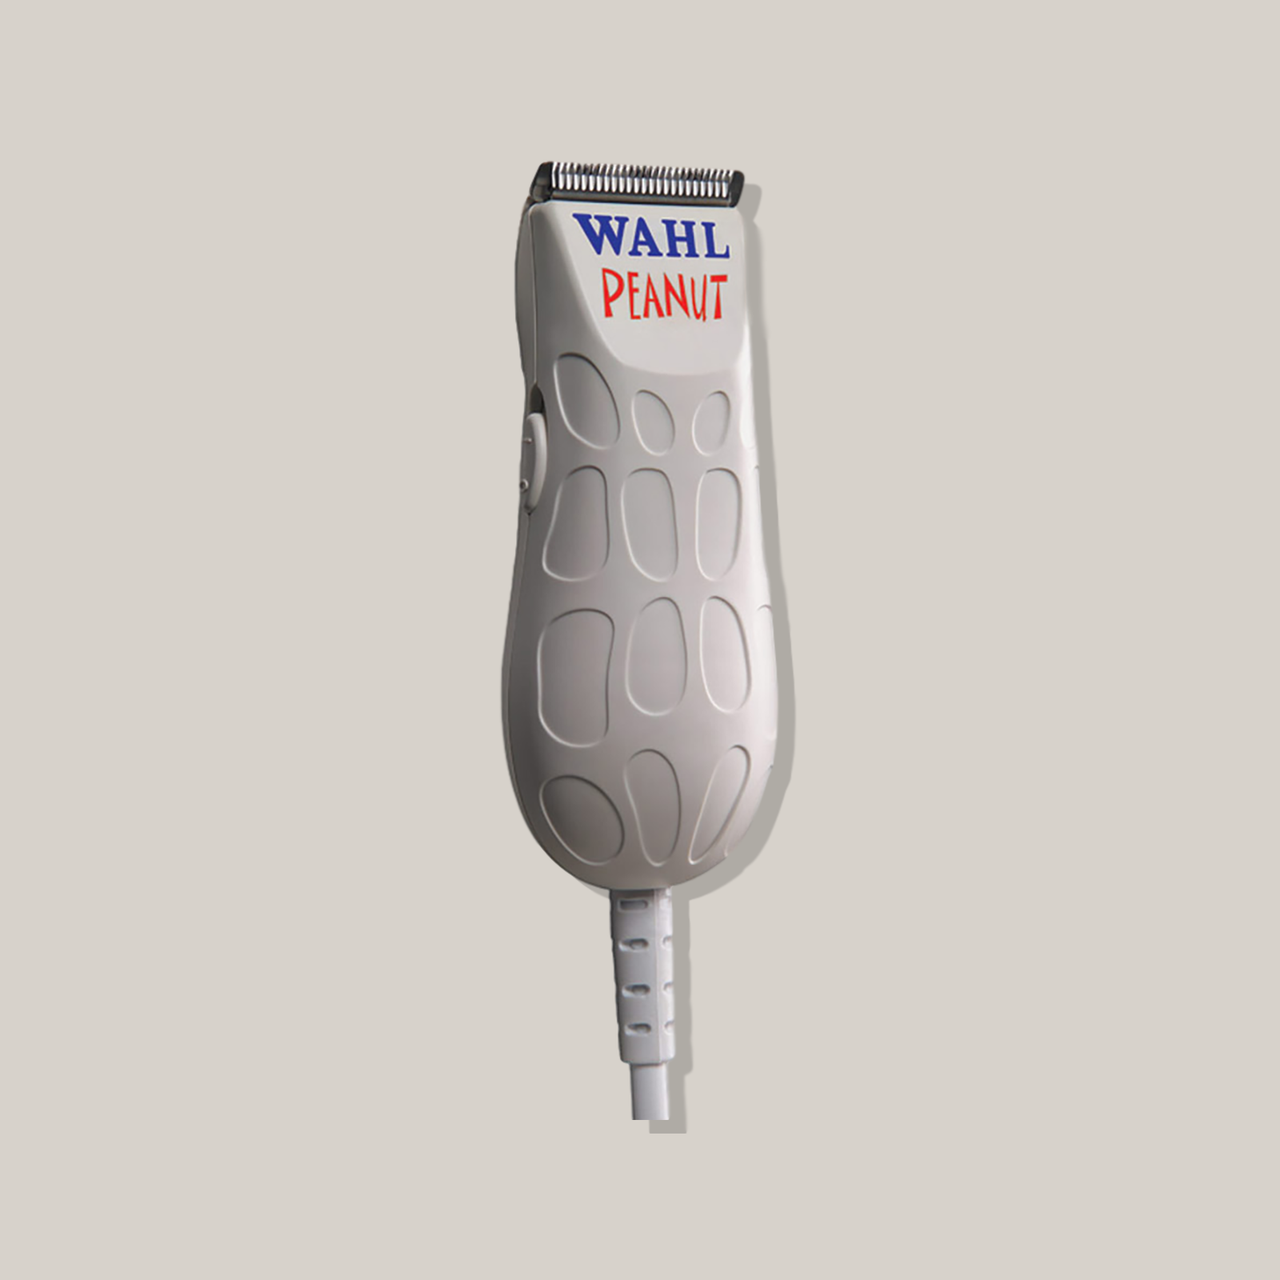 Wahl Peanut Trimmer w/ 4 Guides  White #56115 